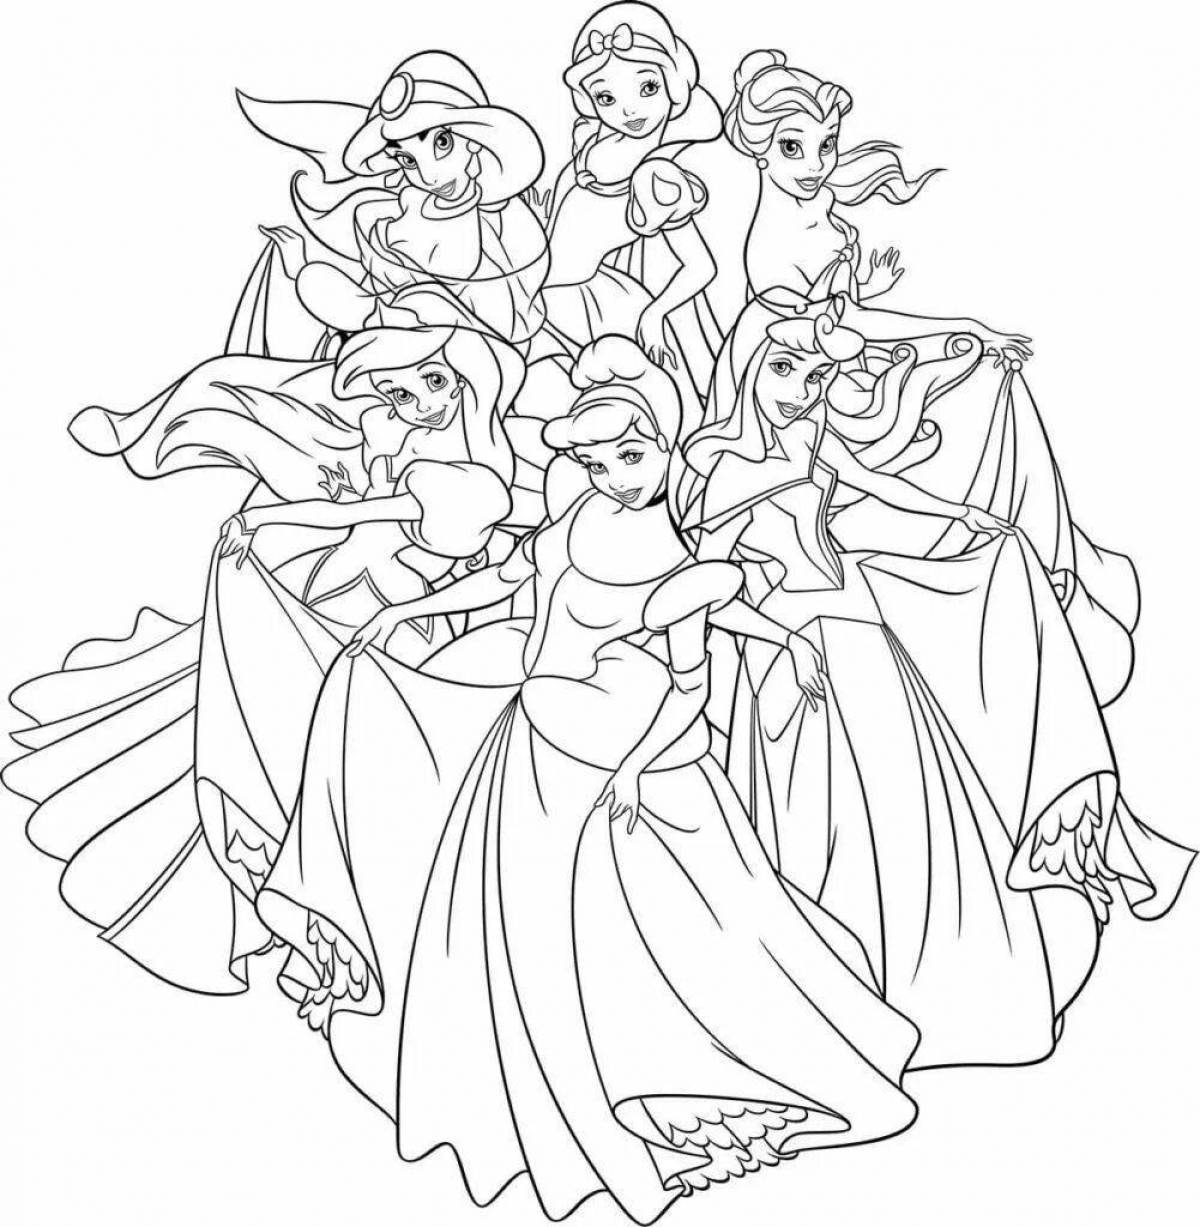 Amazing princess coloring pages